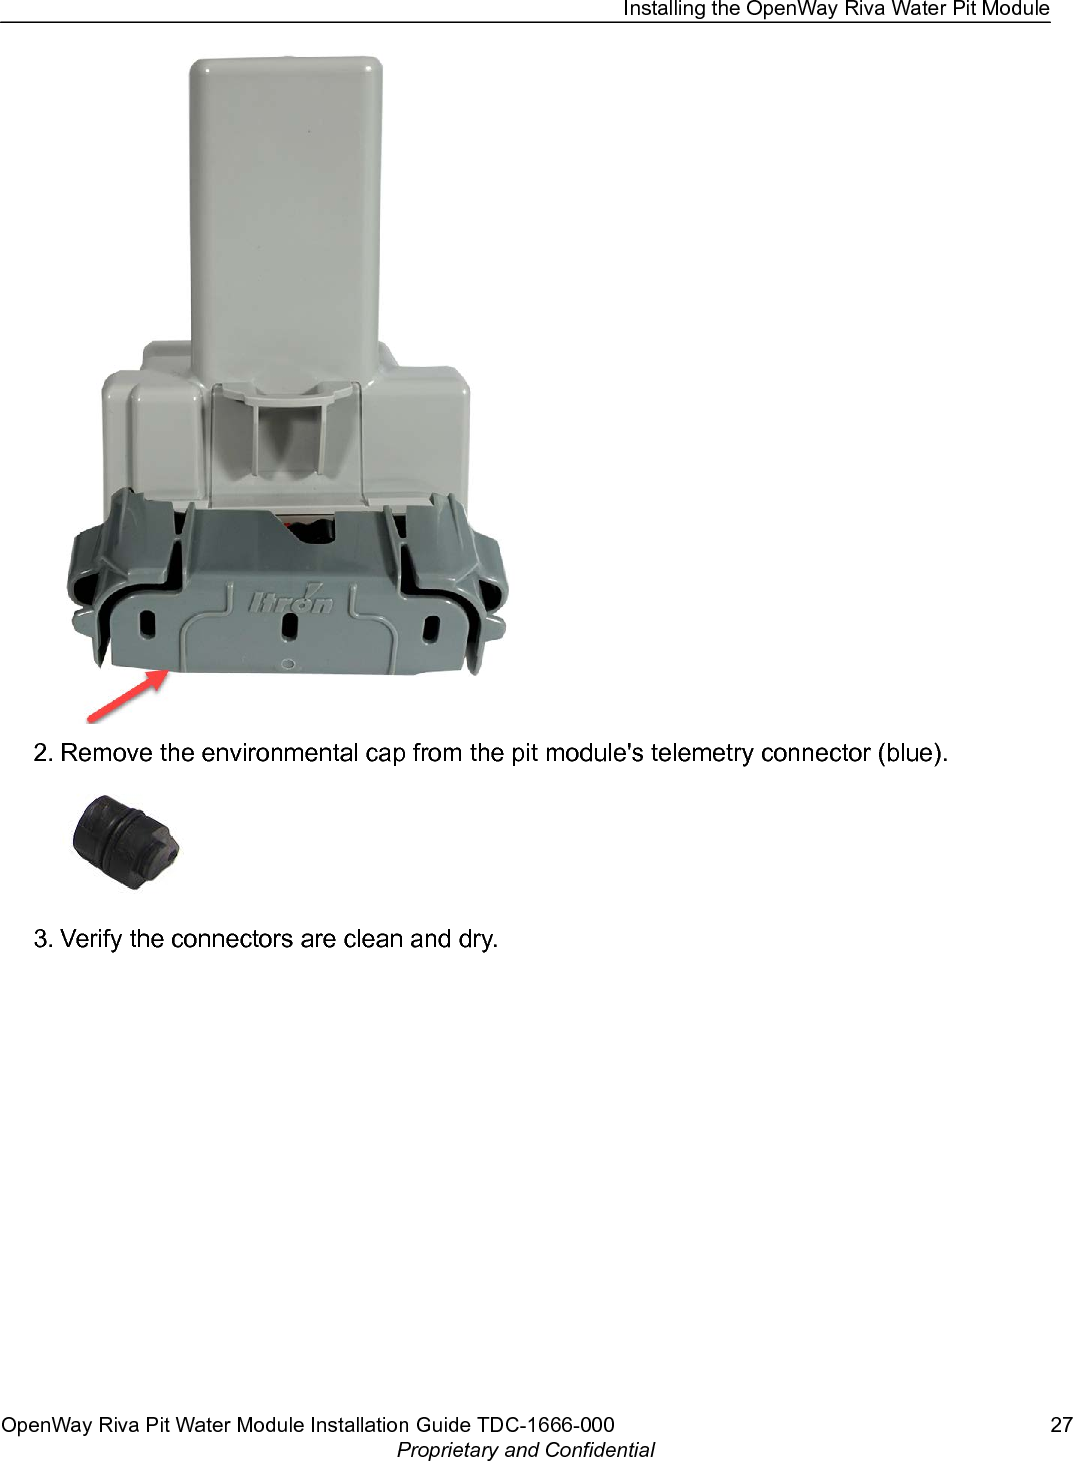 2. Remove the environmental cap from the pit module&apos;s telemetry connector (blue).3. Verify the connectors are clean and dry.Installing the OpenWay Riva Water Pit ModuleOpenWay Riva Pit Water Module Installation Guide TDC-1666-000 27Proprietary and Confidential